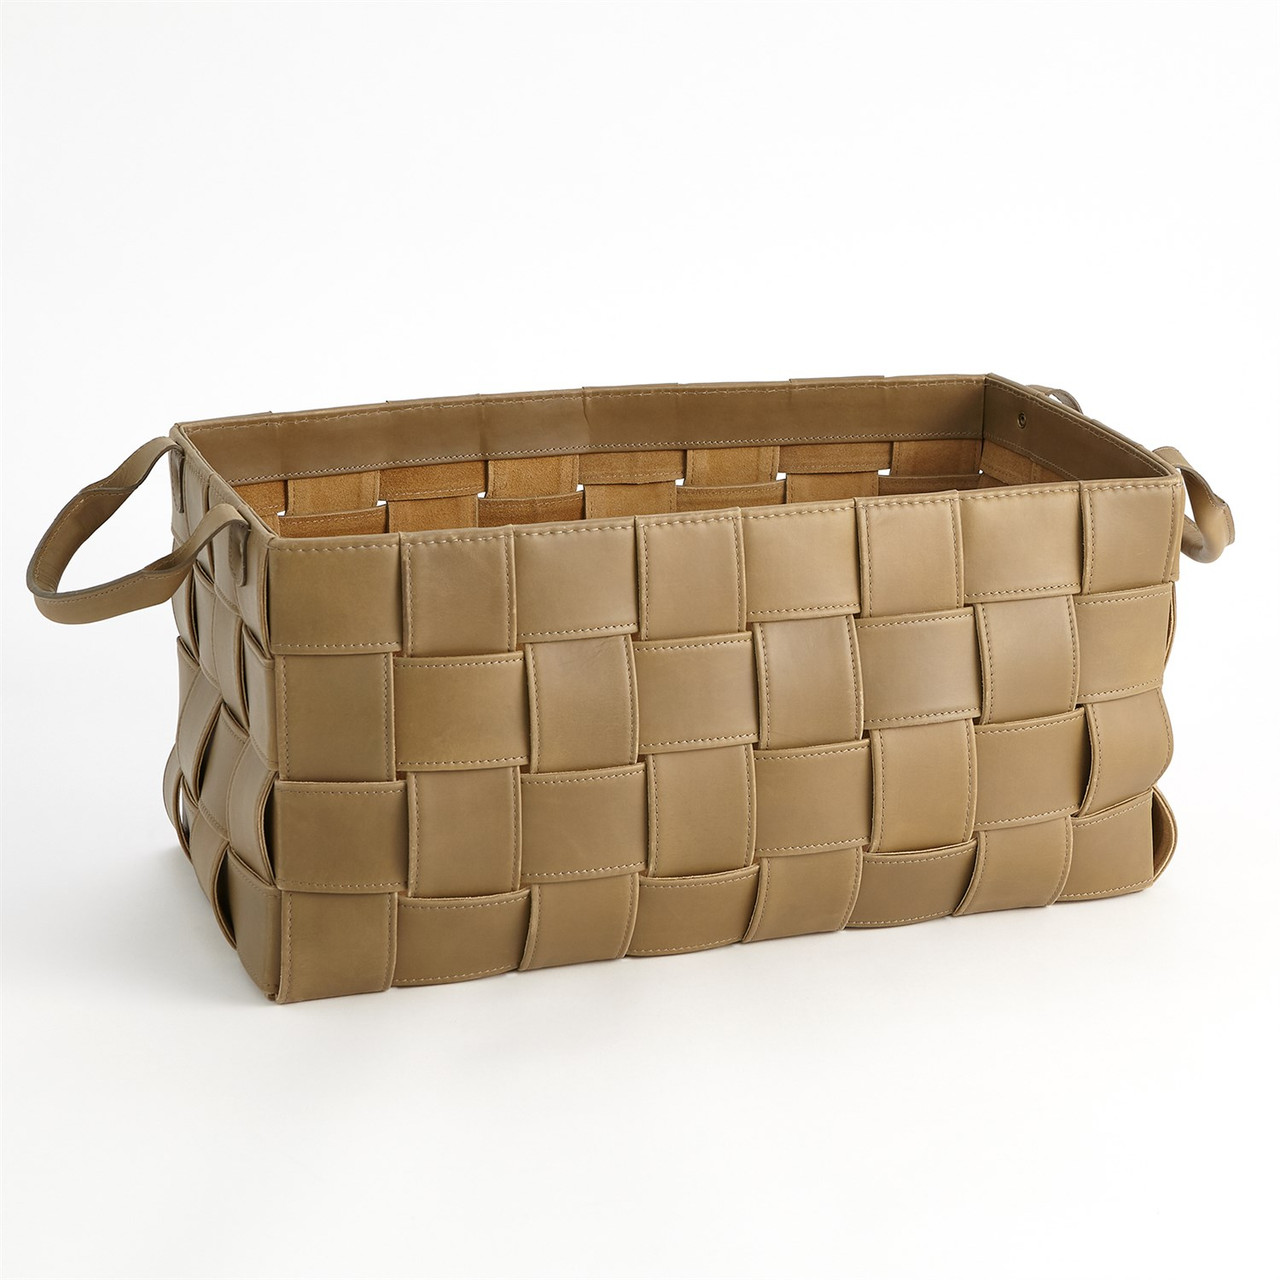 Global Views Soft Woven Leather Basket - Putty - Lg